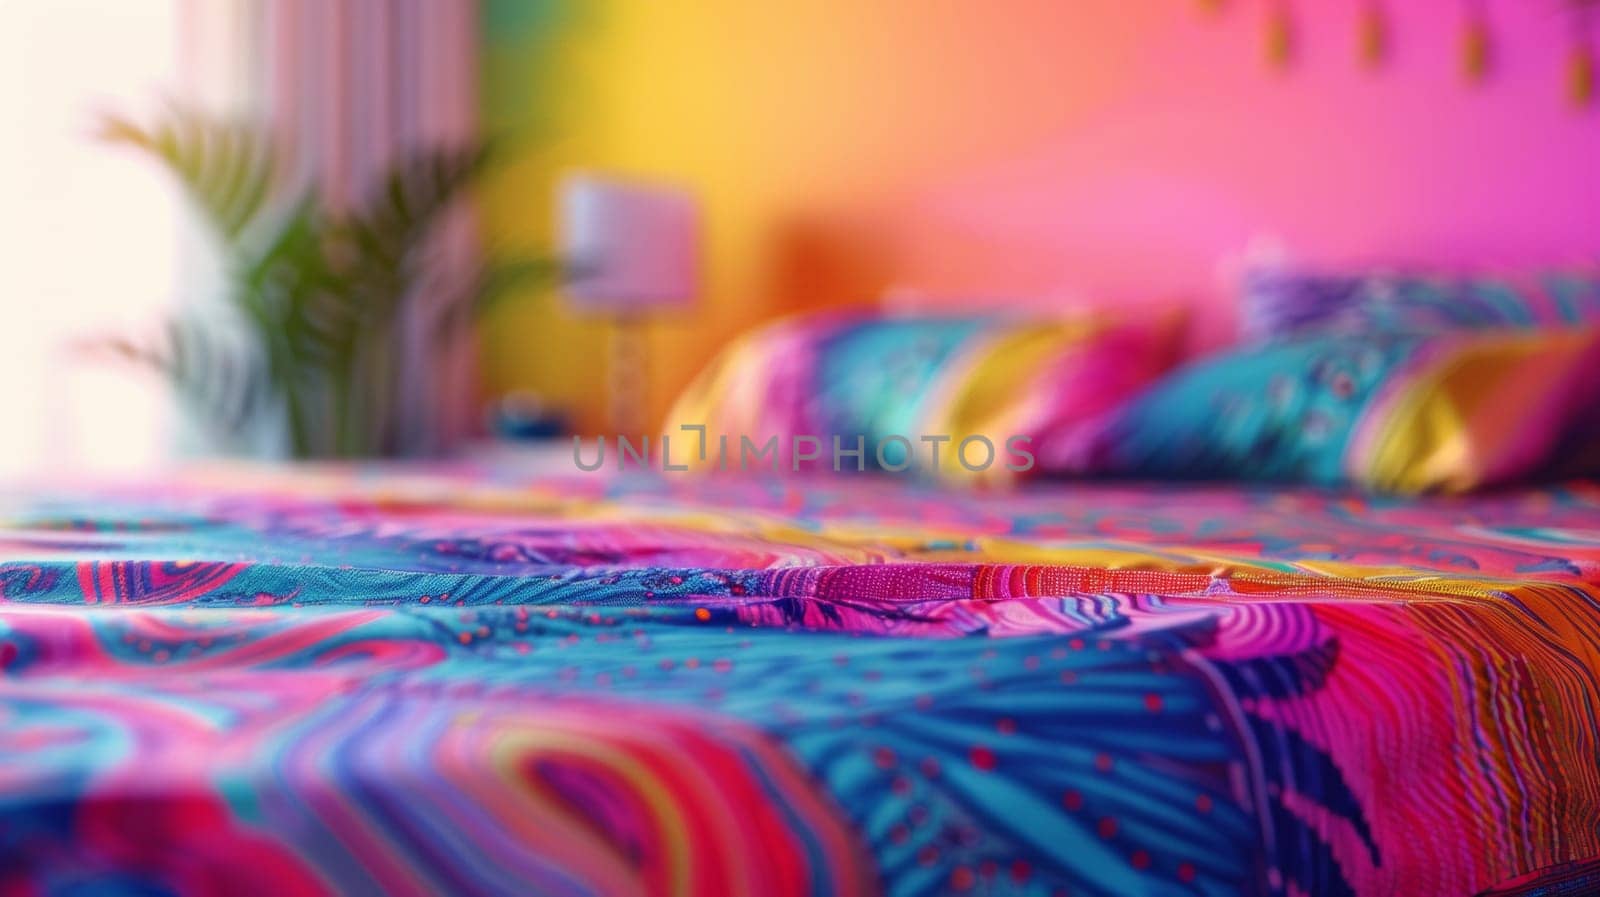 A colorful bed with a bright colored blanket and pillows